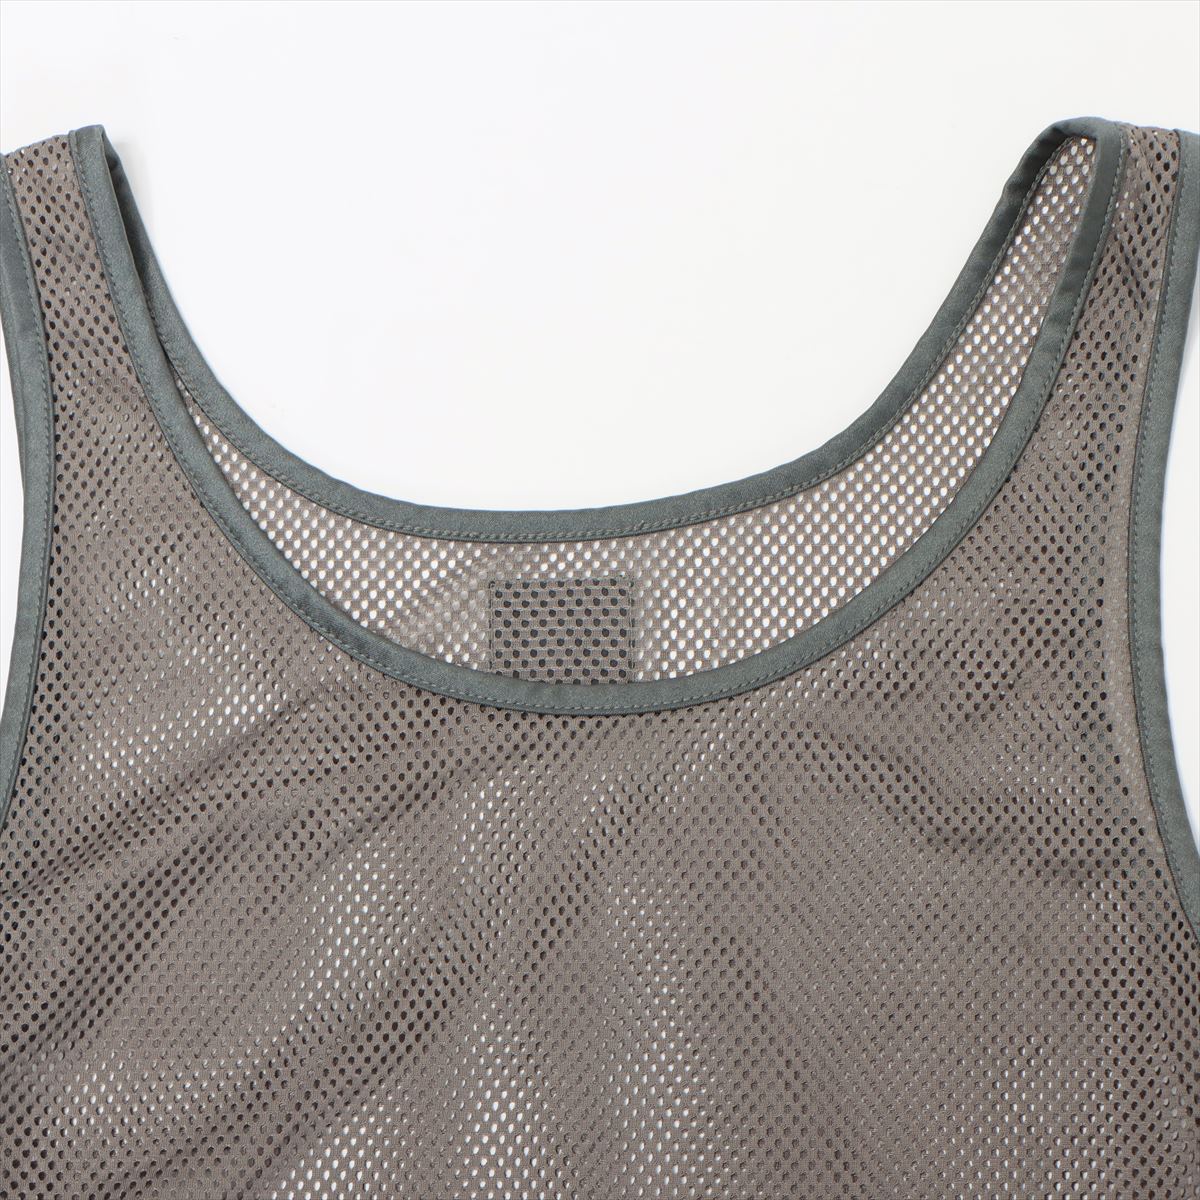 Chanel Sports Coco Mark 03P Polyester Tank top 40 Ladies' Grey  Mesh